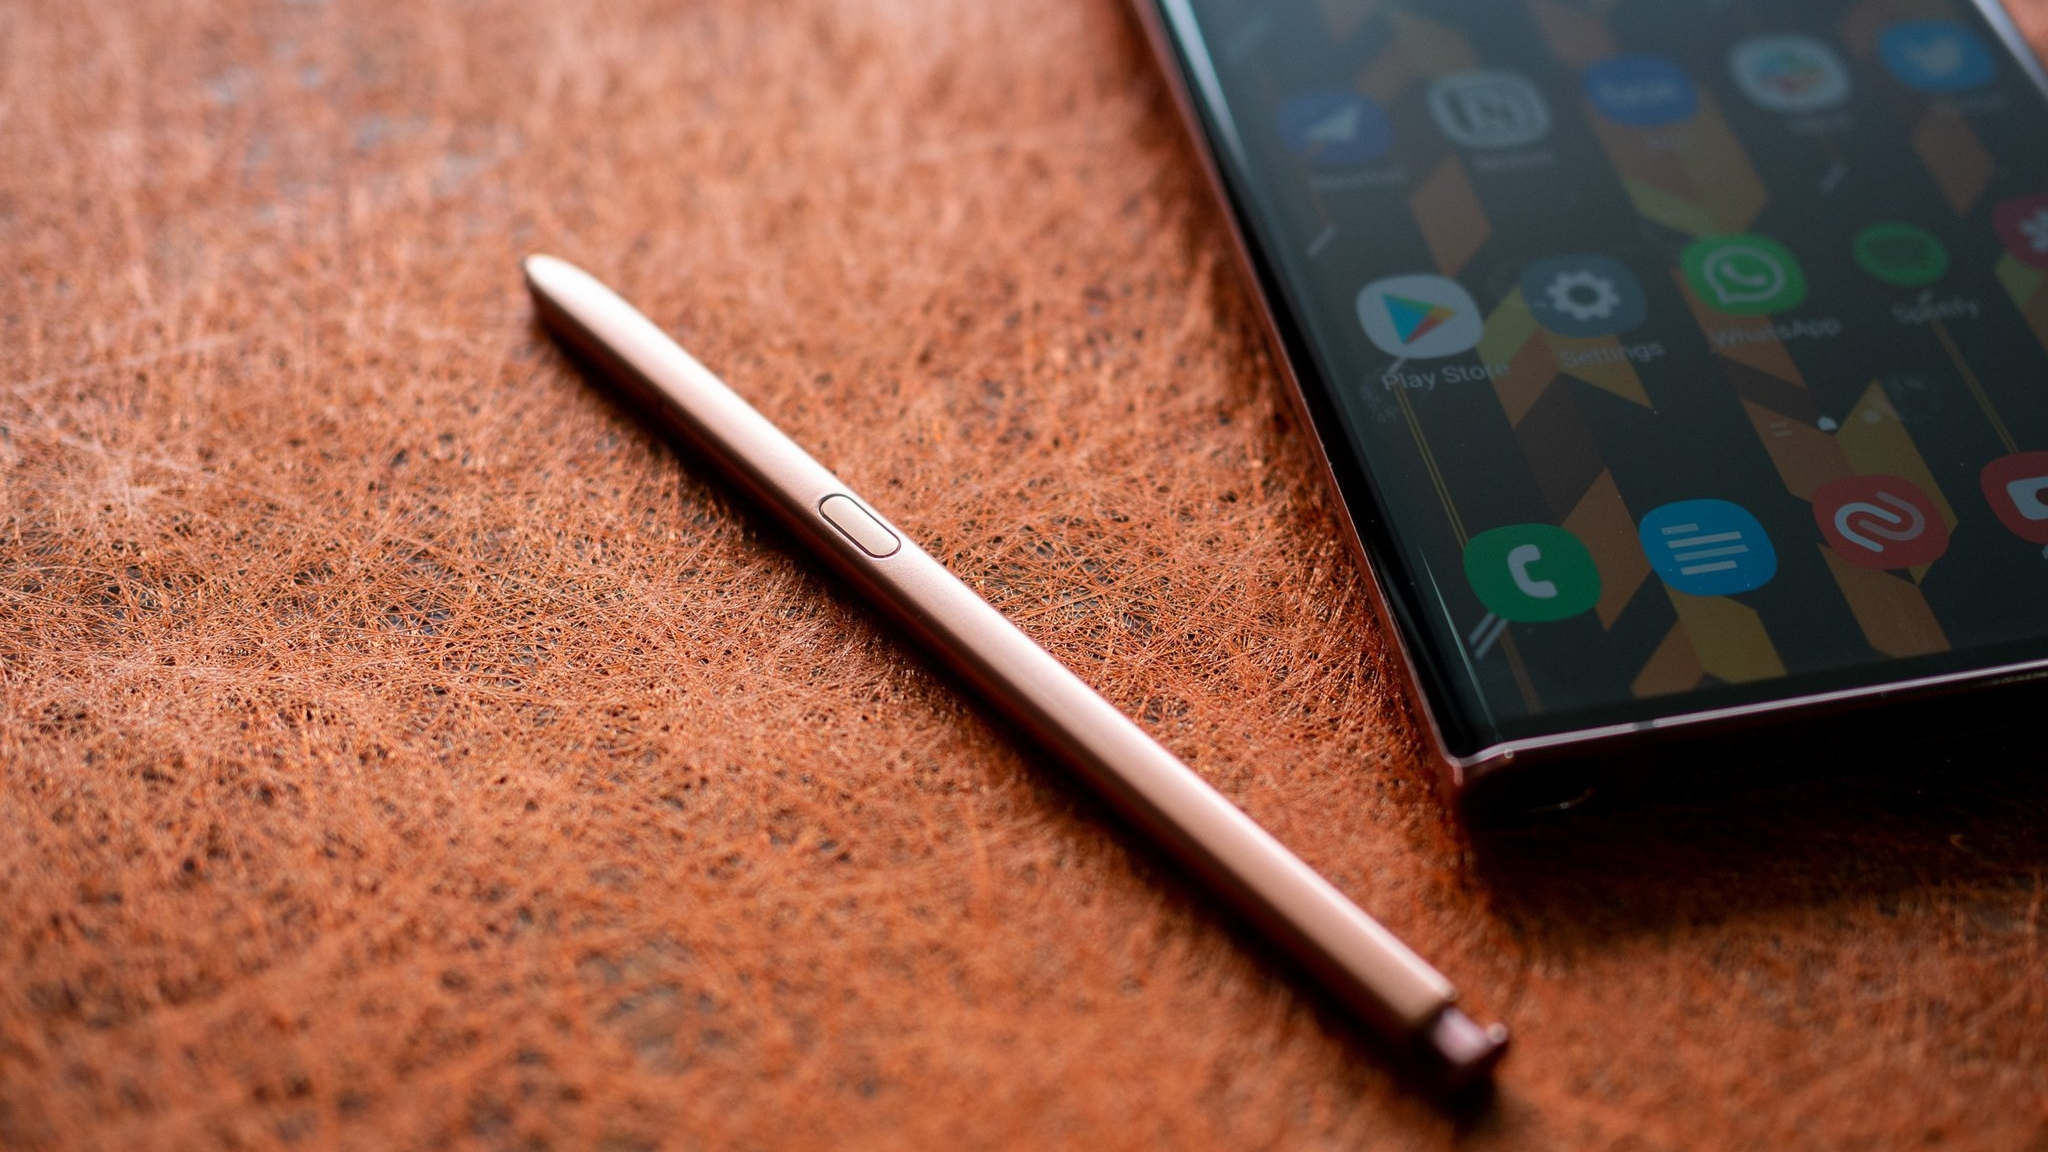 The Galaxy Note 20 Ultra next to the S Pen